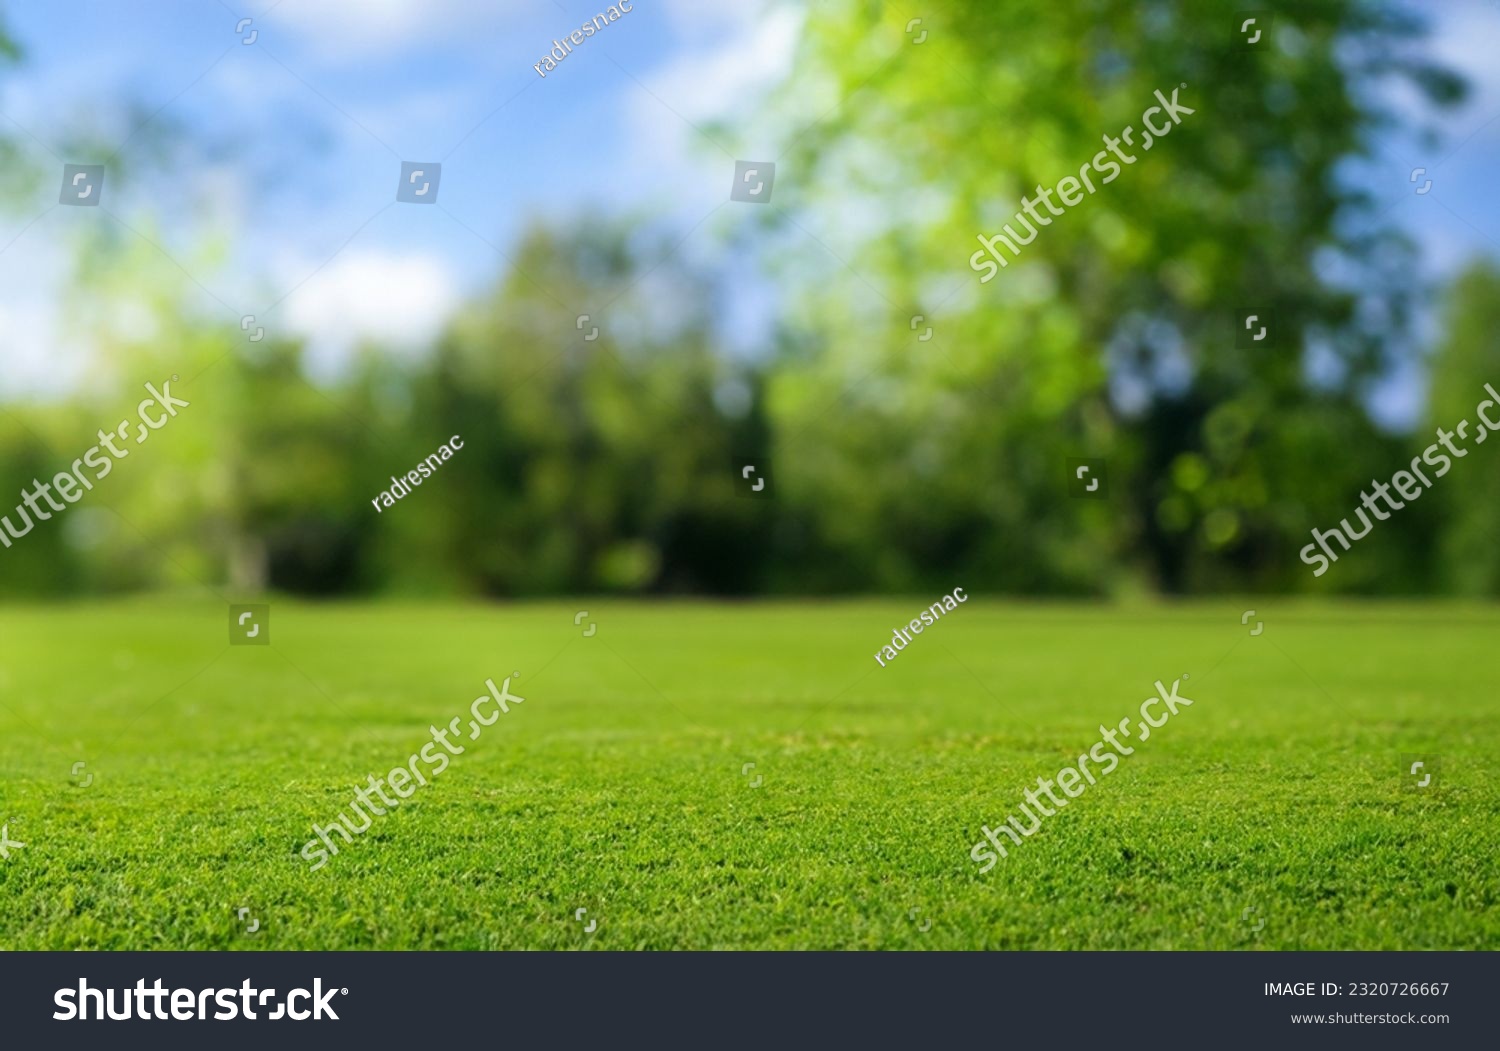 Beautiful blurred background image of spring nature with a neatly trimmed lawn surrounded by trees against a blue sky with clouds on a bright sunny day. #2320726667